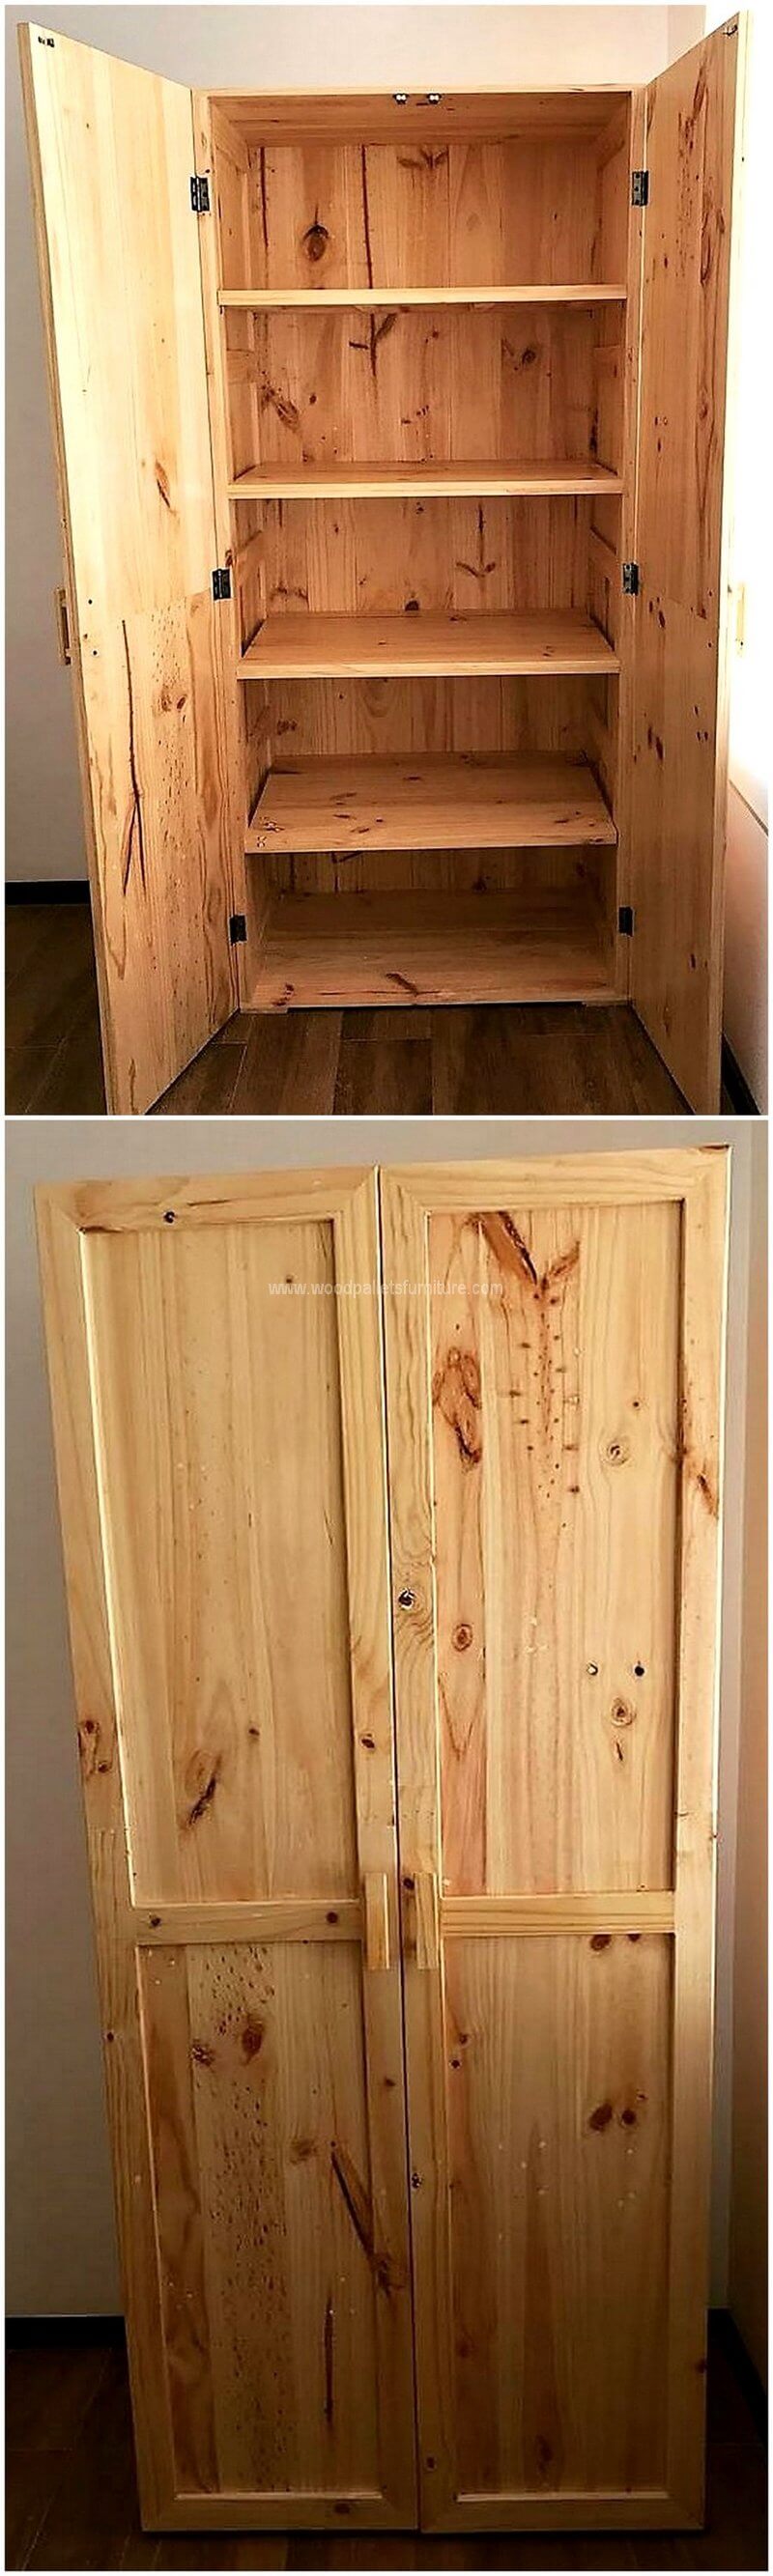 recycled pallet closet